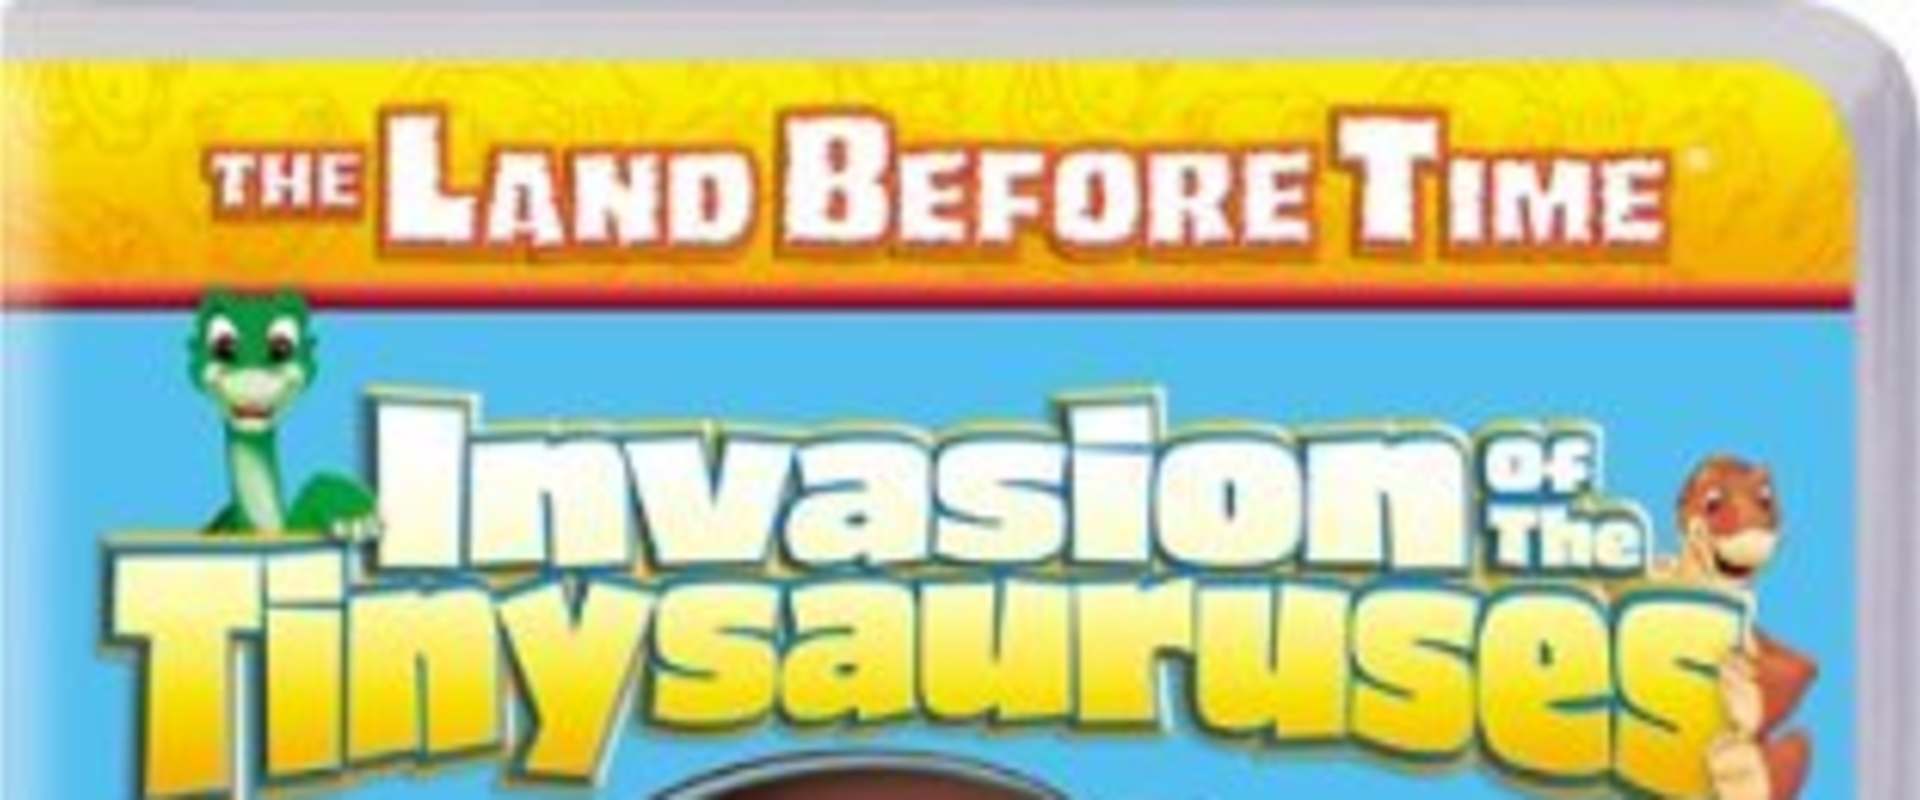 The Land Before Time XI: Invasion of the Tinysauruses background 2